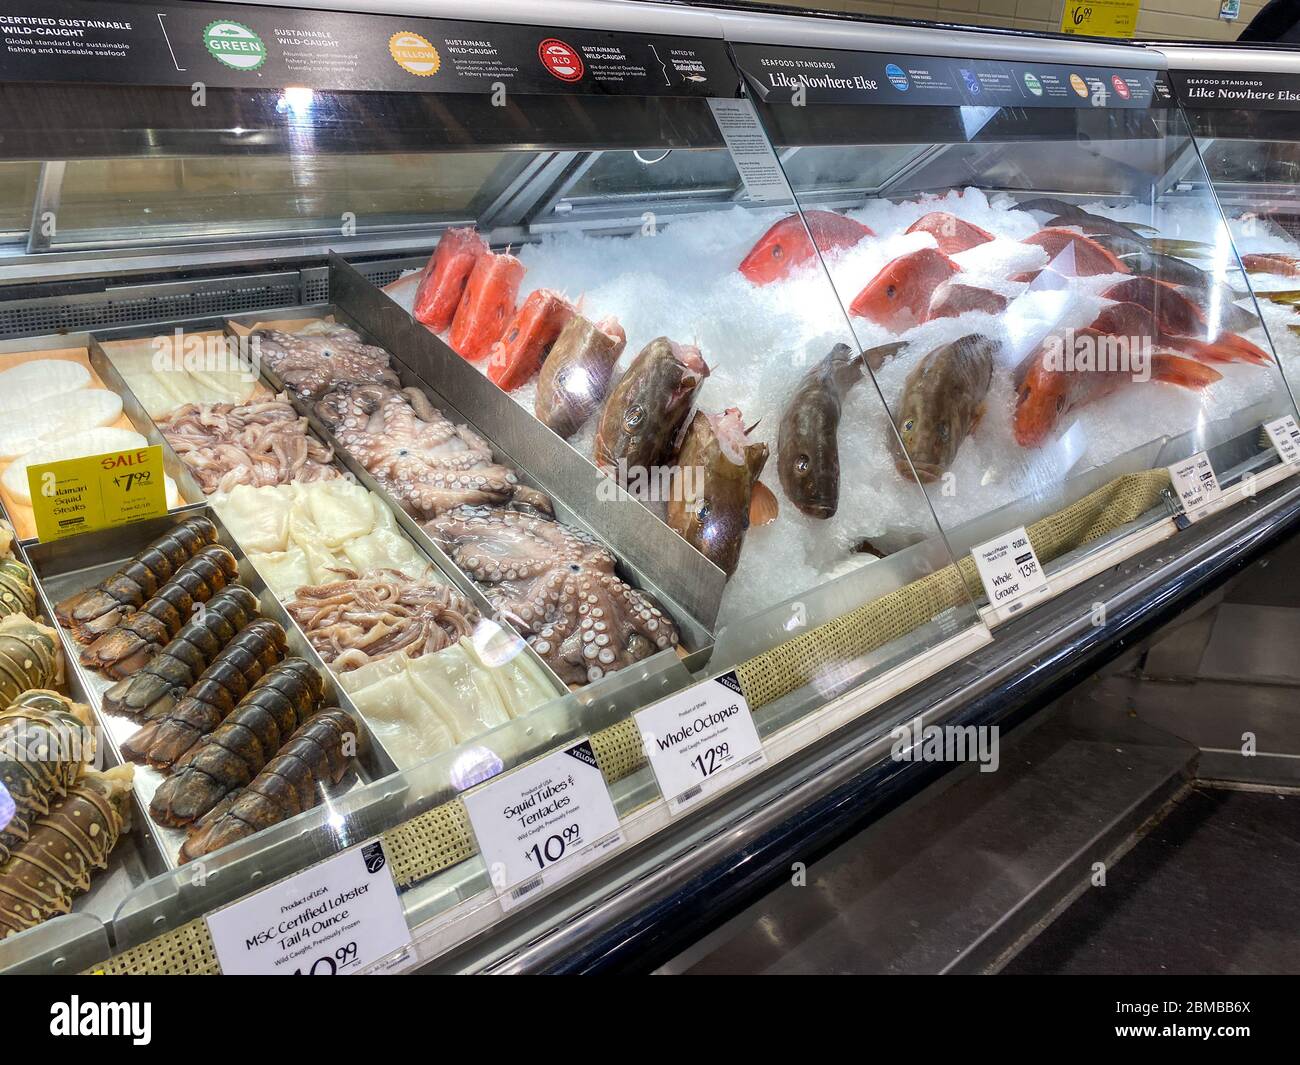 https://c8.alamy.com/comp/2BMBB6X/orlandoflusa-5320-a-display-of-lobster-octopus-squid-and-fish-at-the-seafood-department-of-a-whole-foods-market-grocery-store-2BMBB6X.jpg